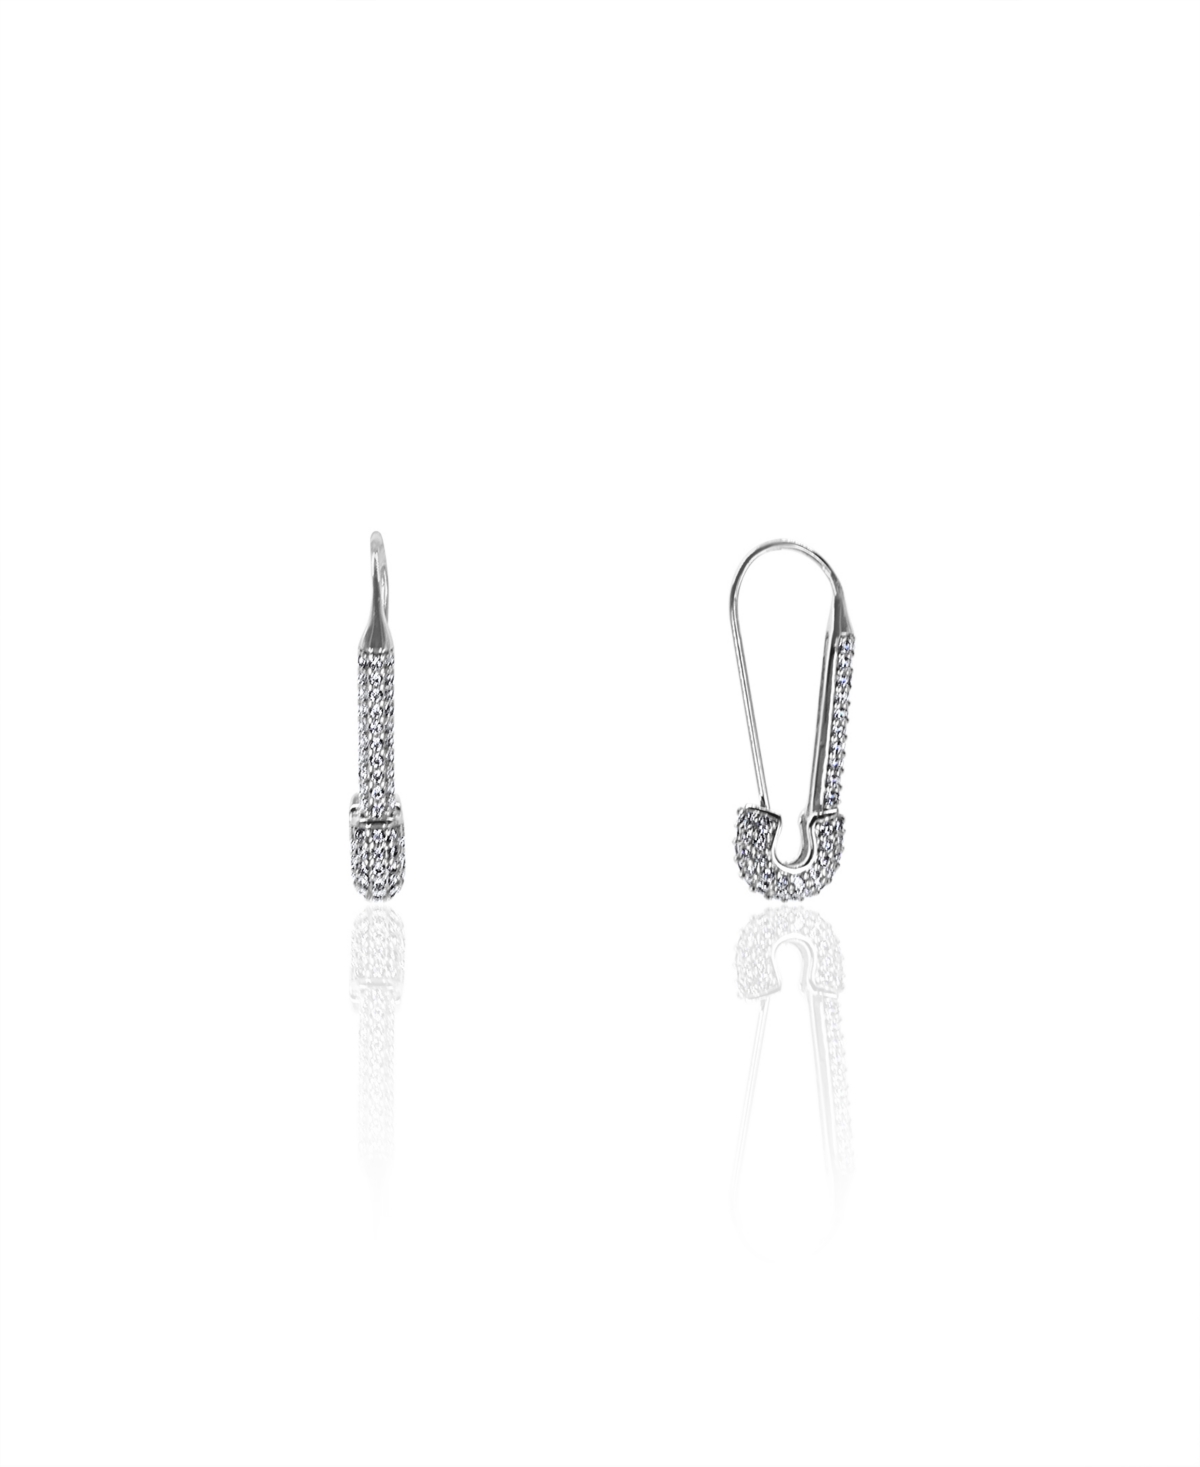 Eseosa Earring in White Gold- Plated Brass - Silver